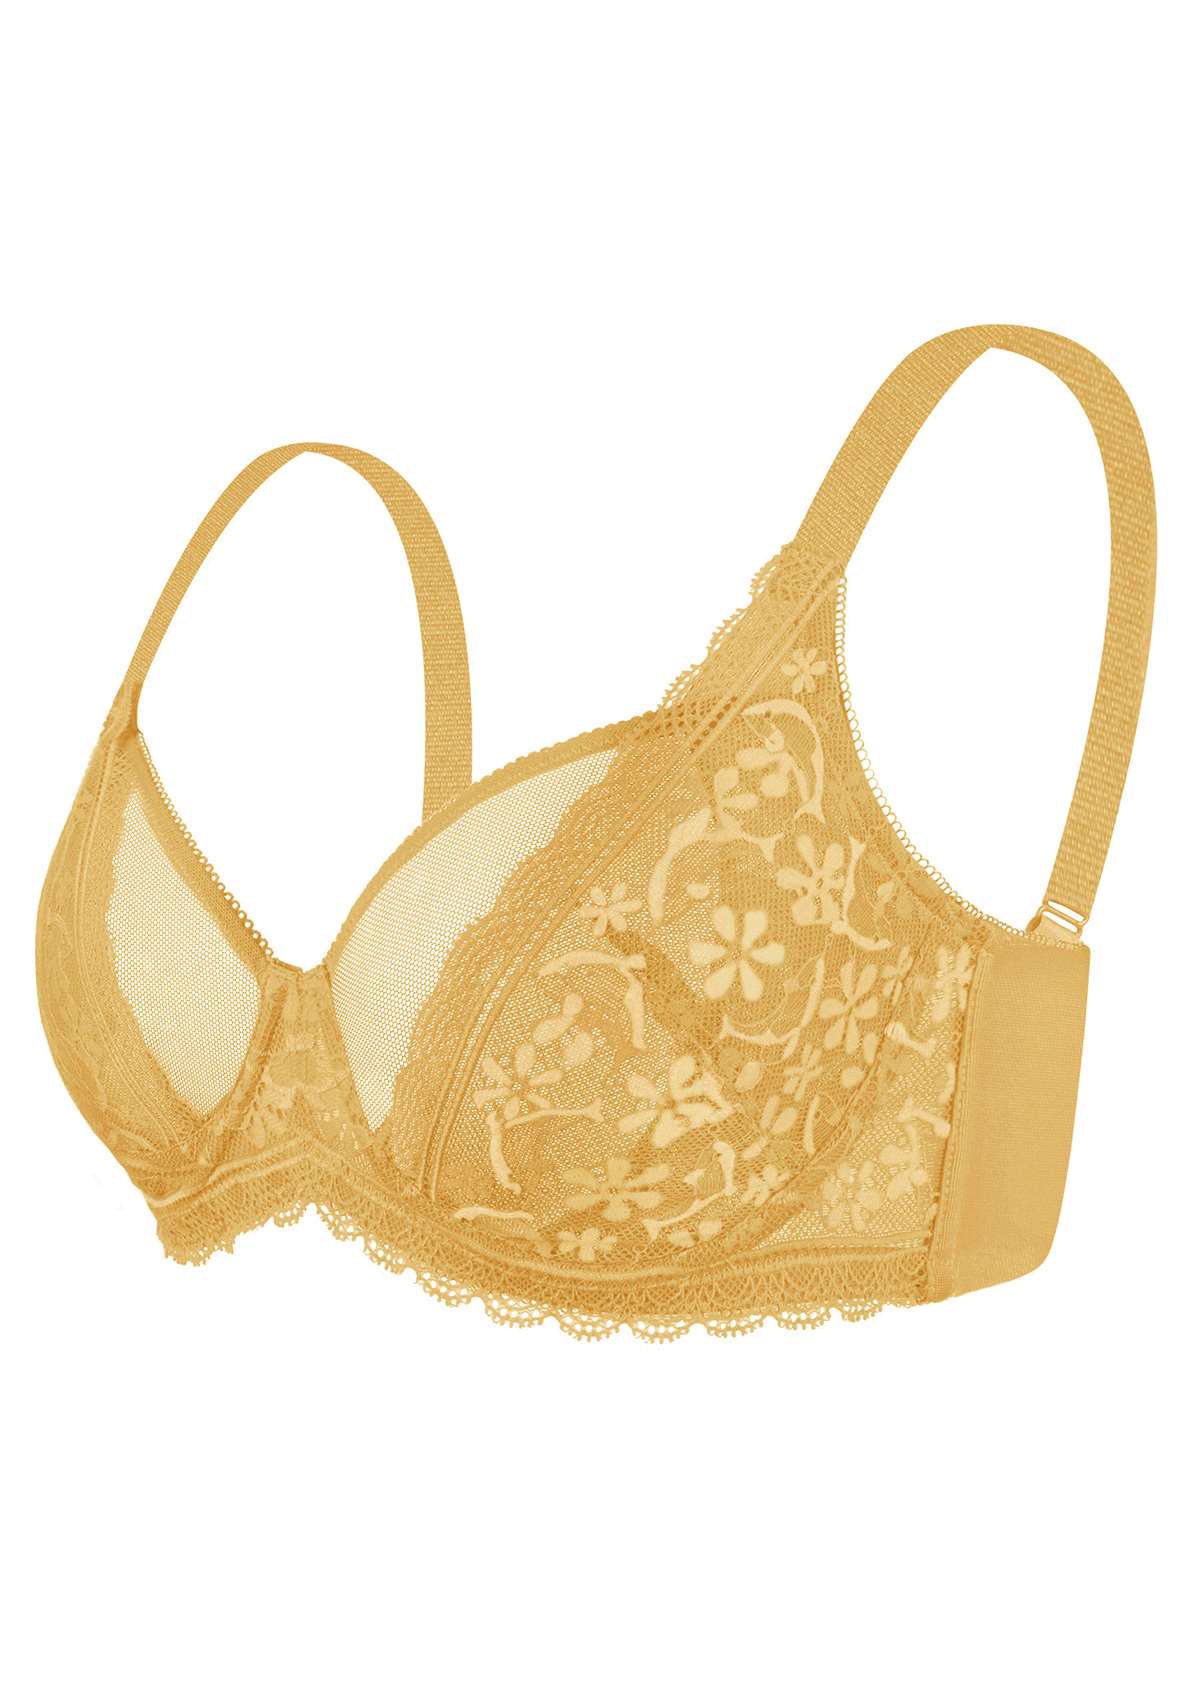 HSIA Anemone Lace Unlined Bra: Supportive, Lightweight Bra - Ginger / 40 / DDD/F